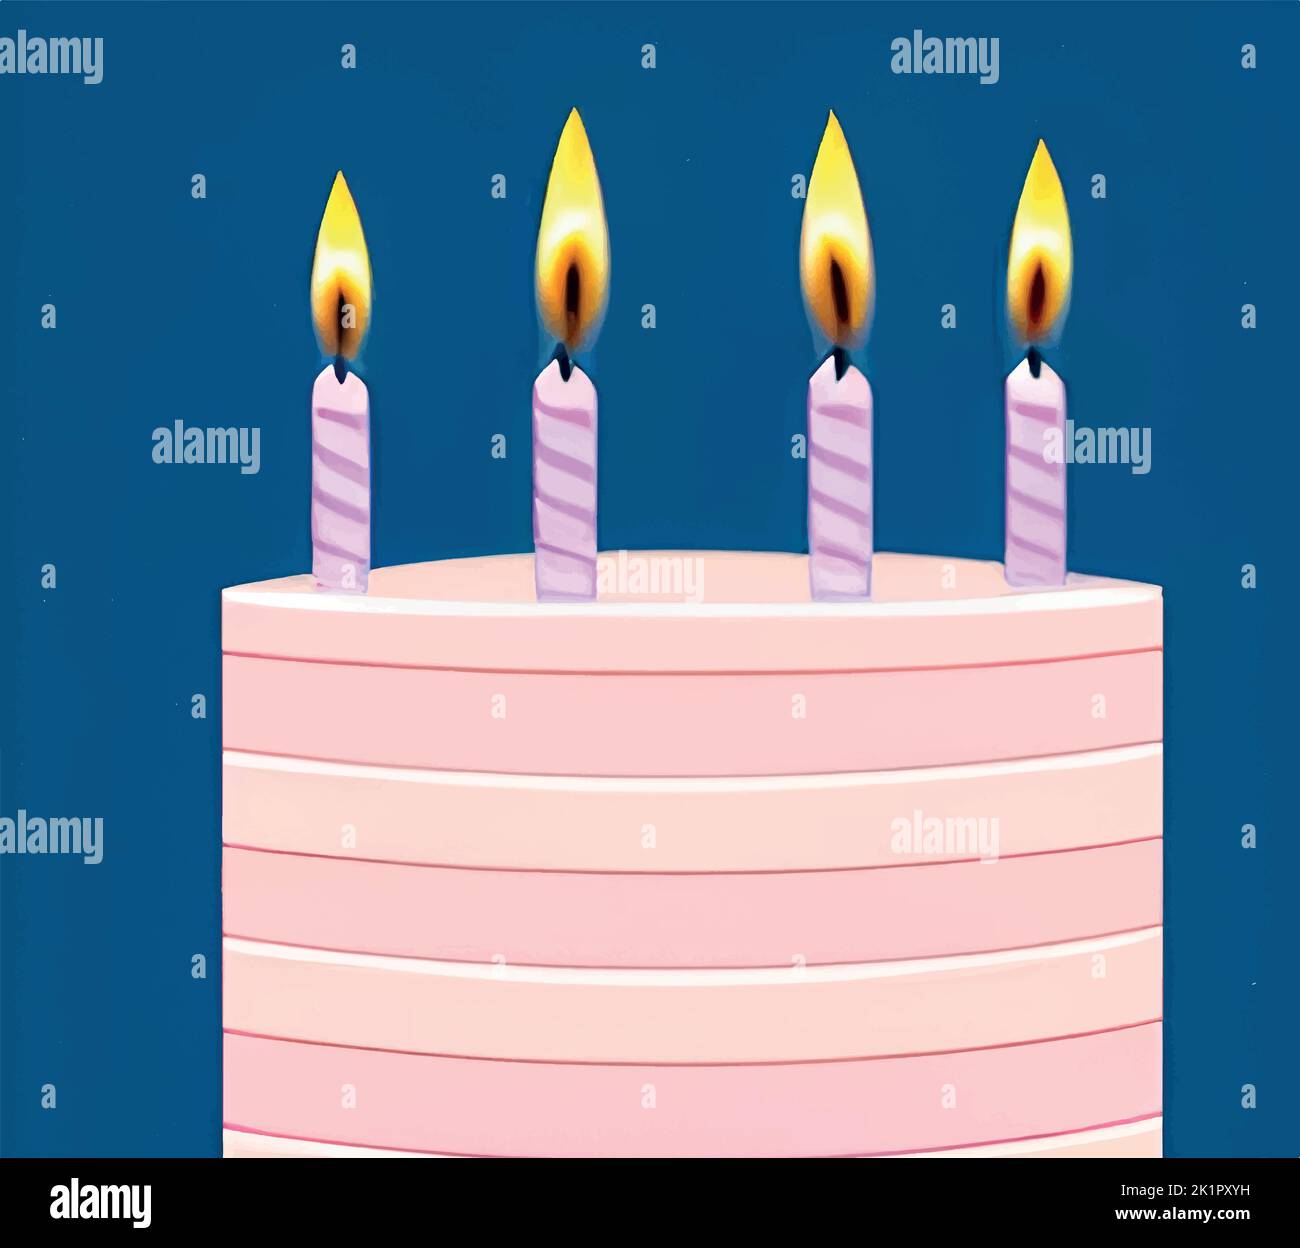 Feliz Cumpleanos 39 - Greeting card. Candle lit in the form of a number  being lit by reflectors in a room with balloons floating with streamers  Stock Vector Image & Art - Alamy